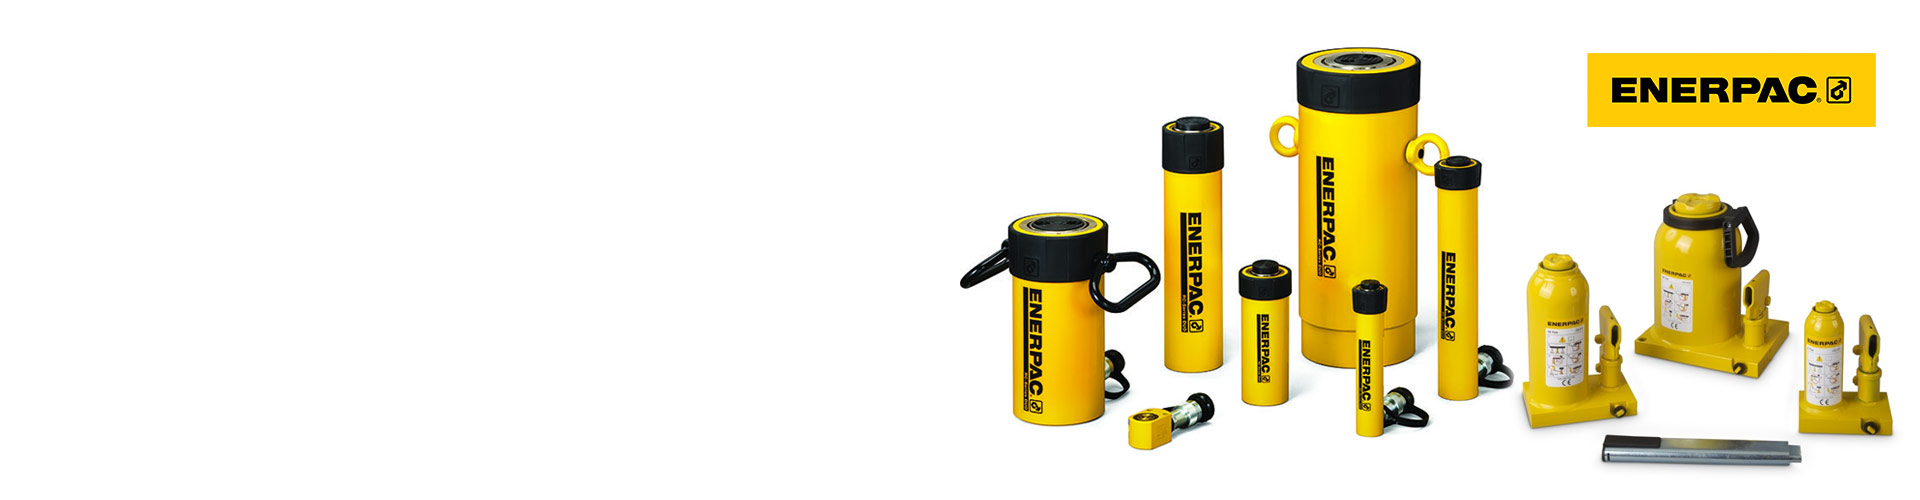 Enerpac Cylinders & Lifting Products in Stock